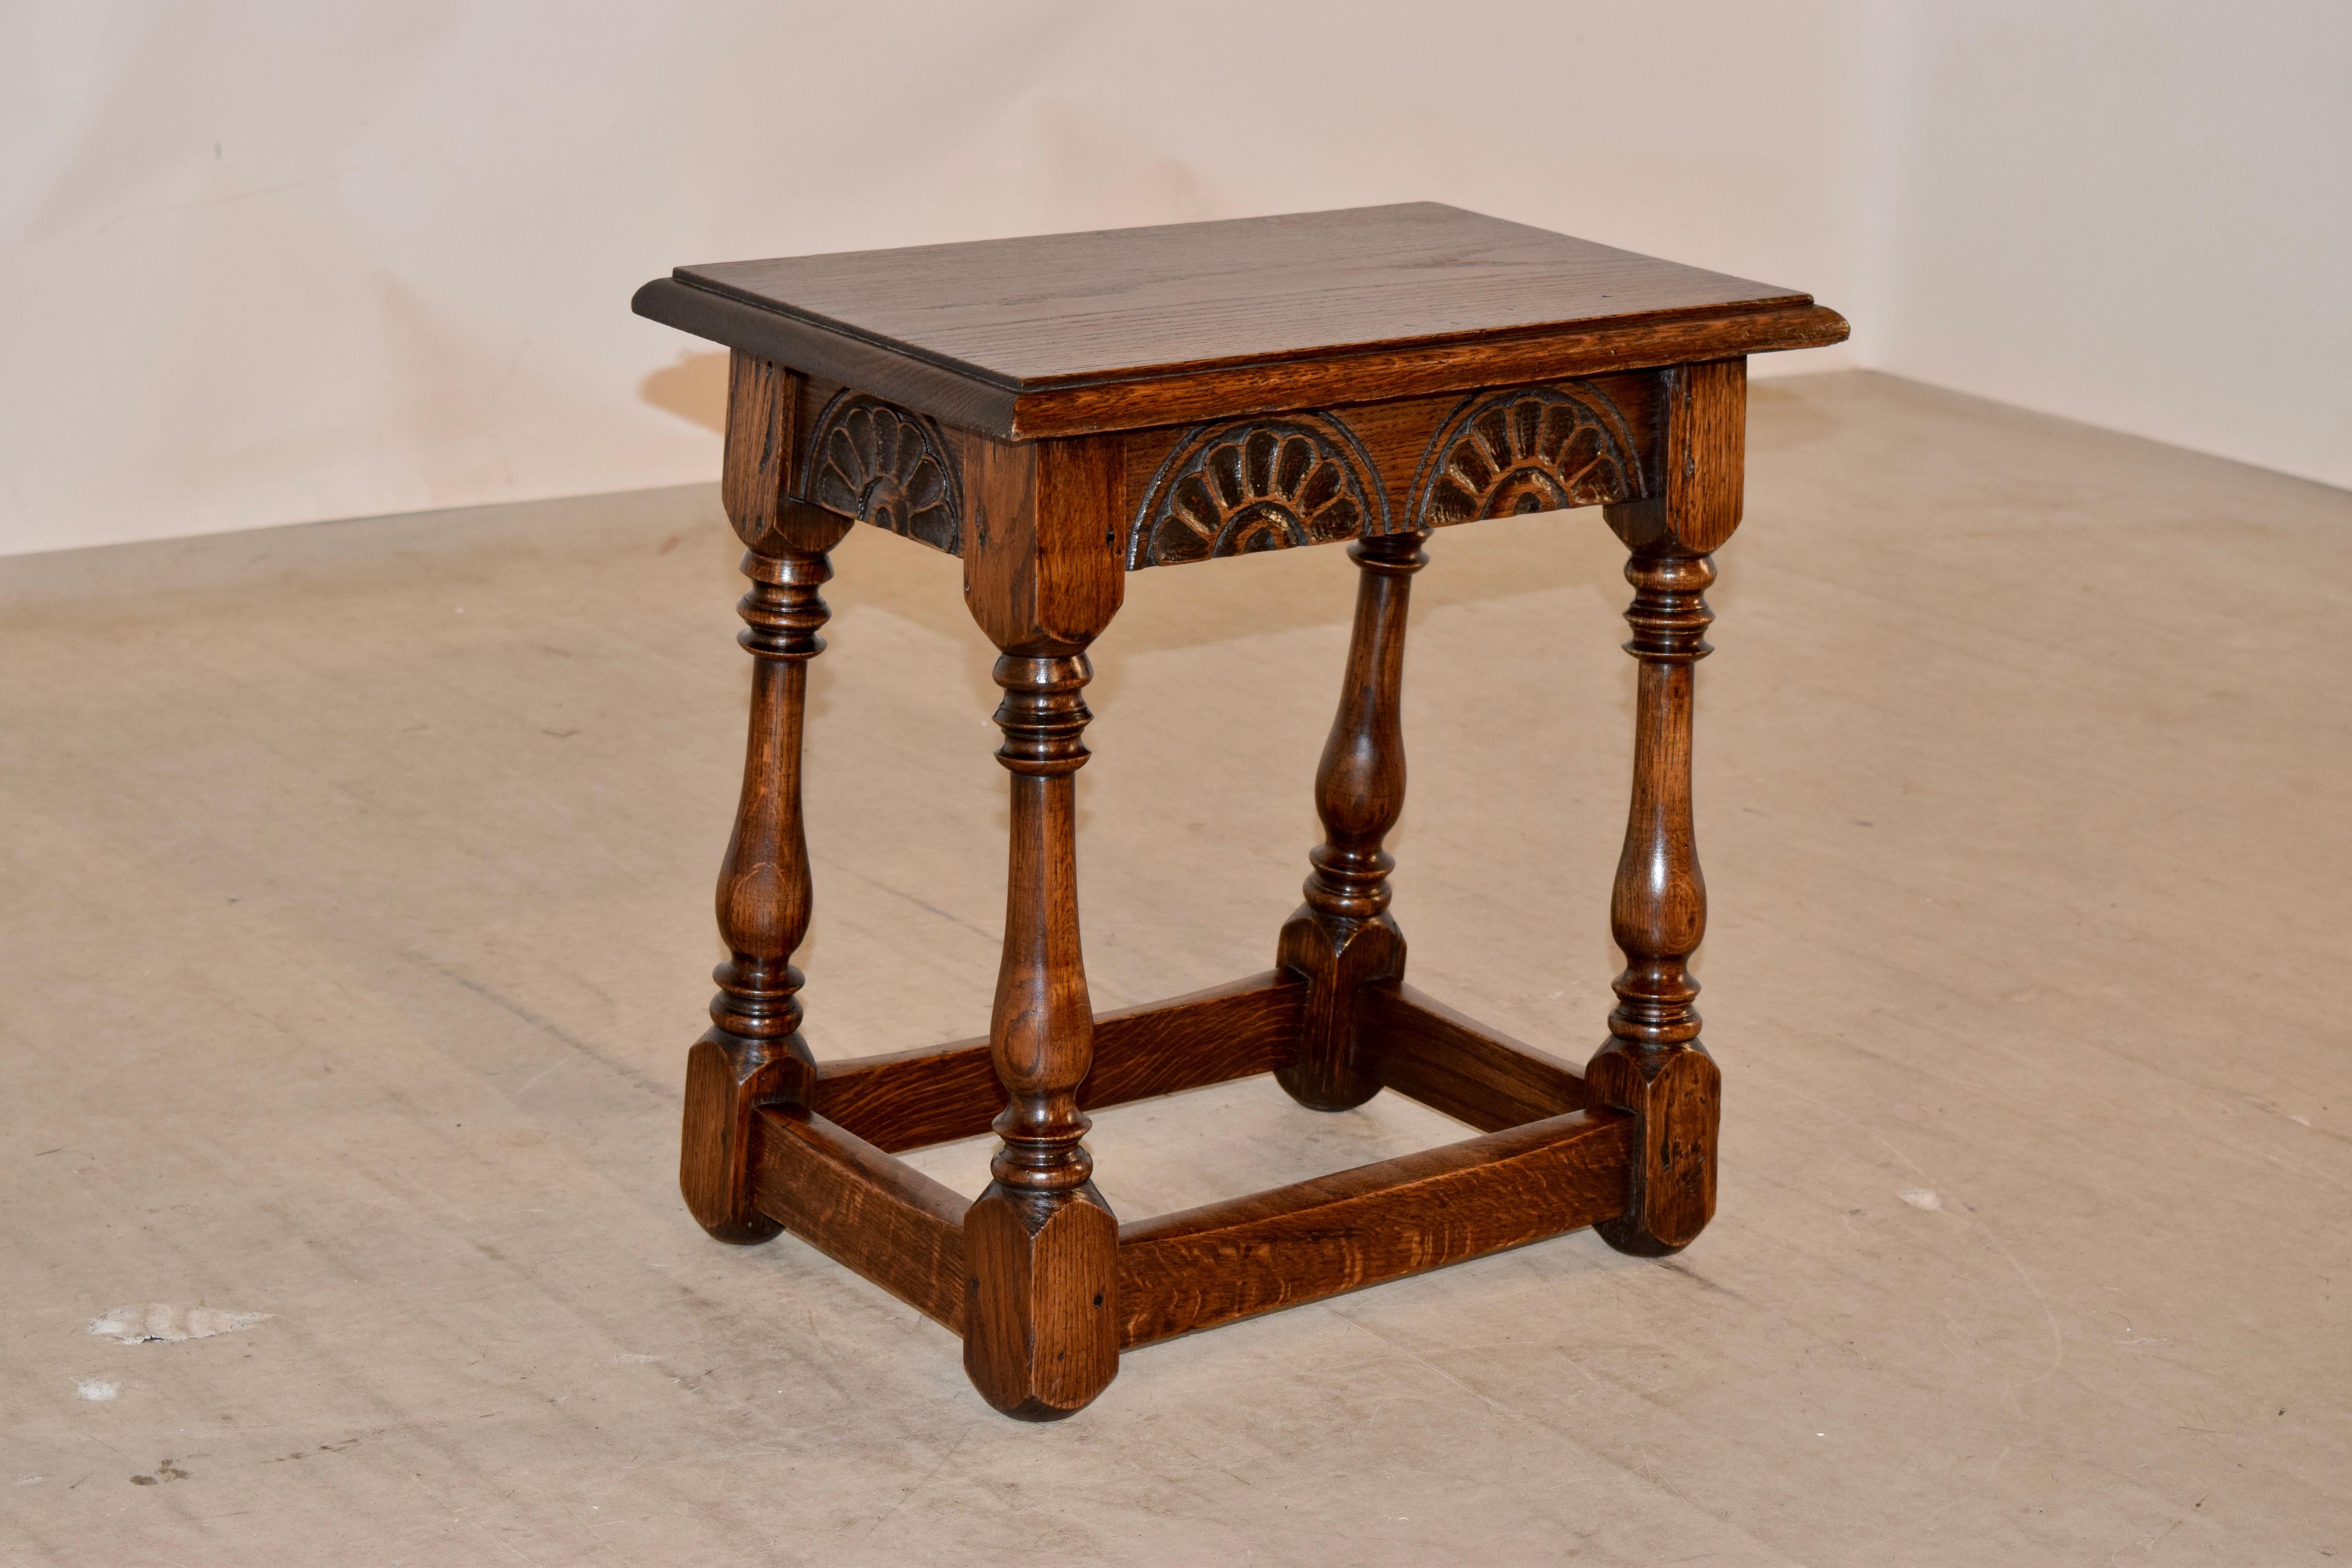 English oak joint stool with a beveled edge around the top following down to hand carved decoration on all four sides of the apron, circa 1900. The stool is supported on hand turned and splayed legs, which are joined by simple stretchers.